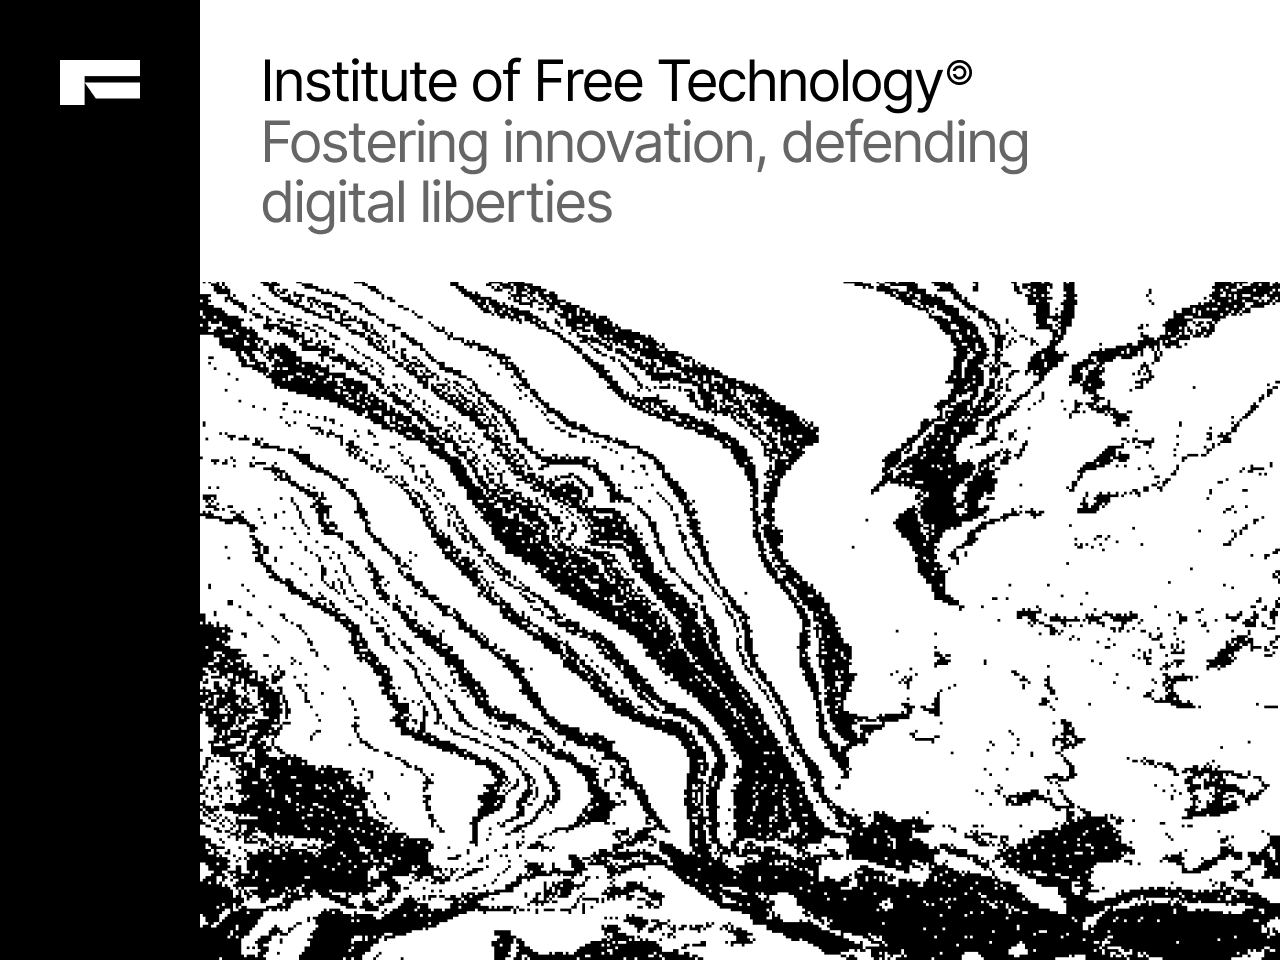 Institute of Free Technology Launches to Defend Digital Liberties